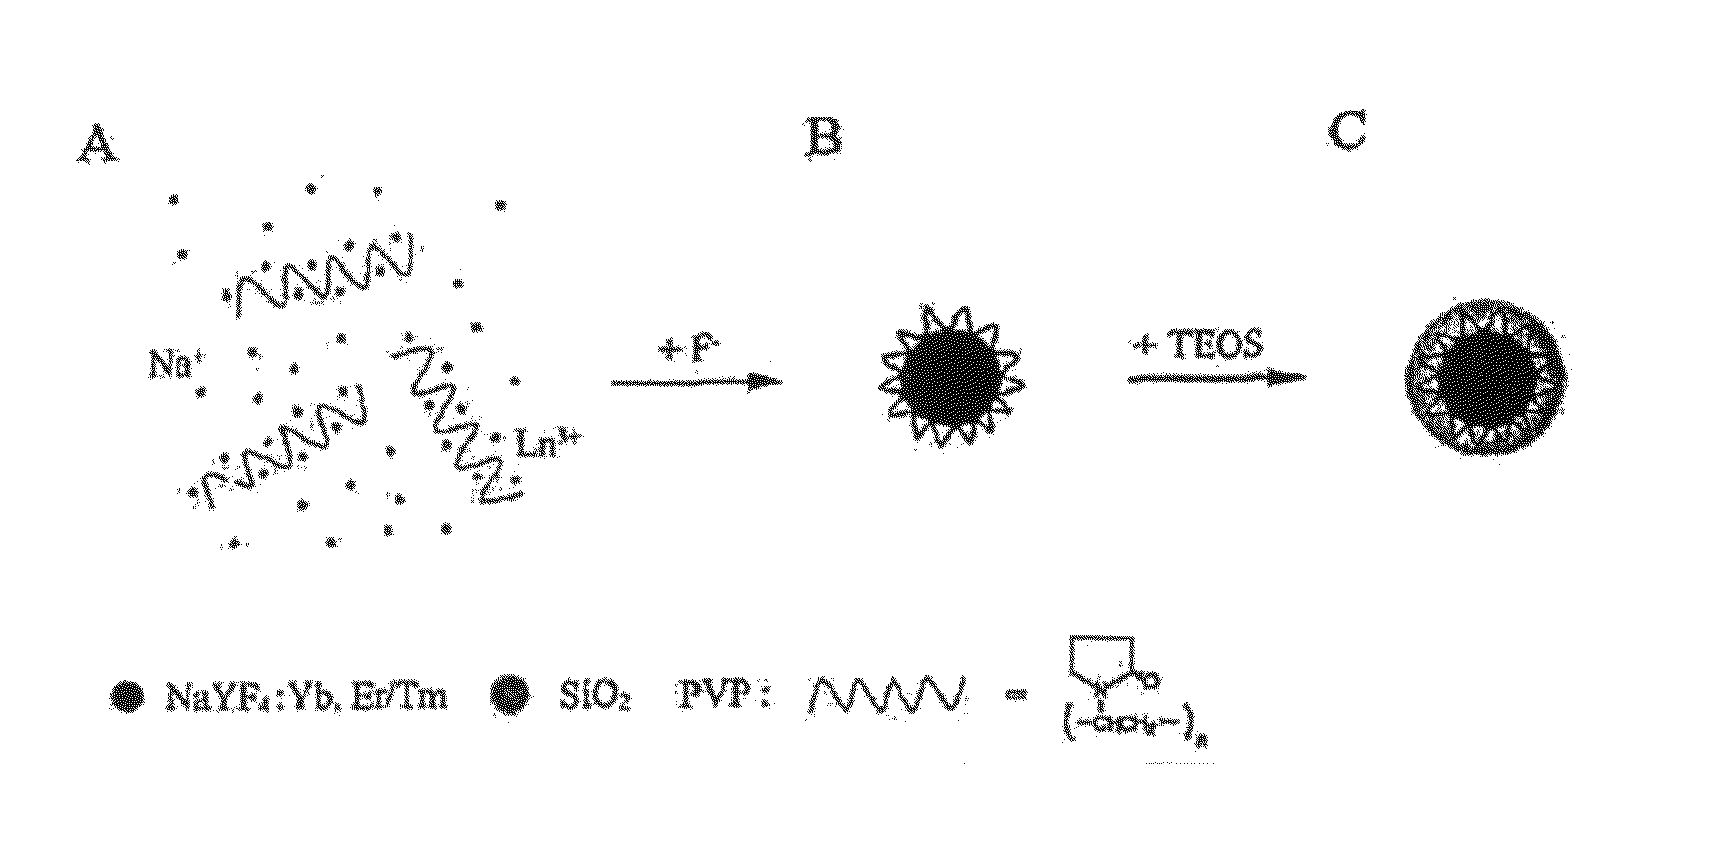 Upconversion fluorescent nano-structured material and uses thereof